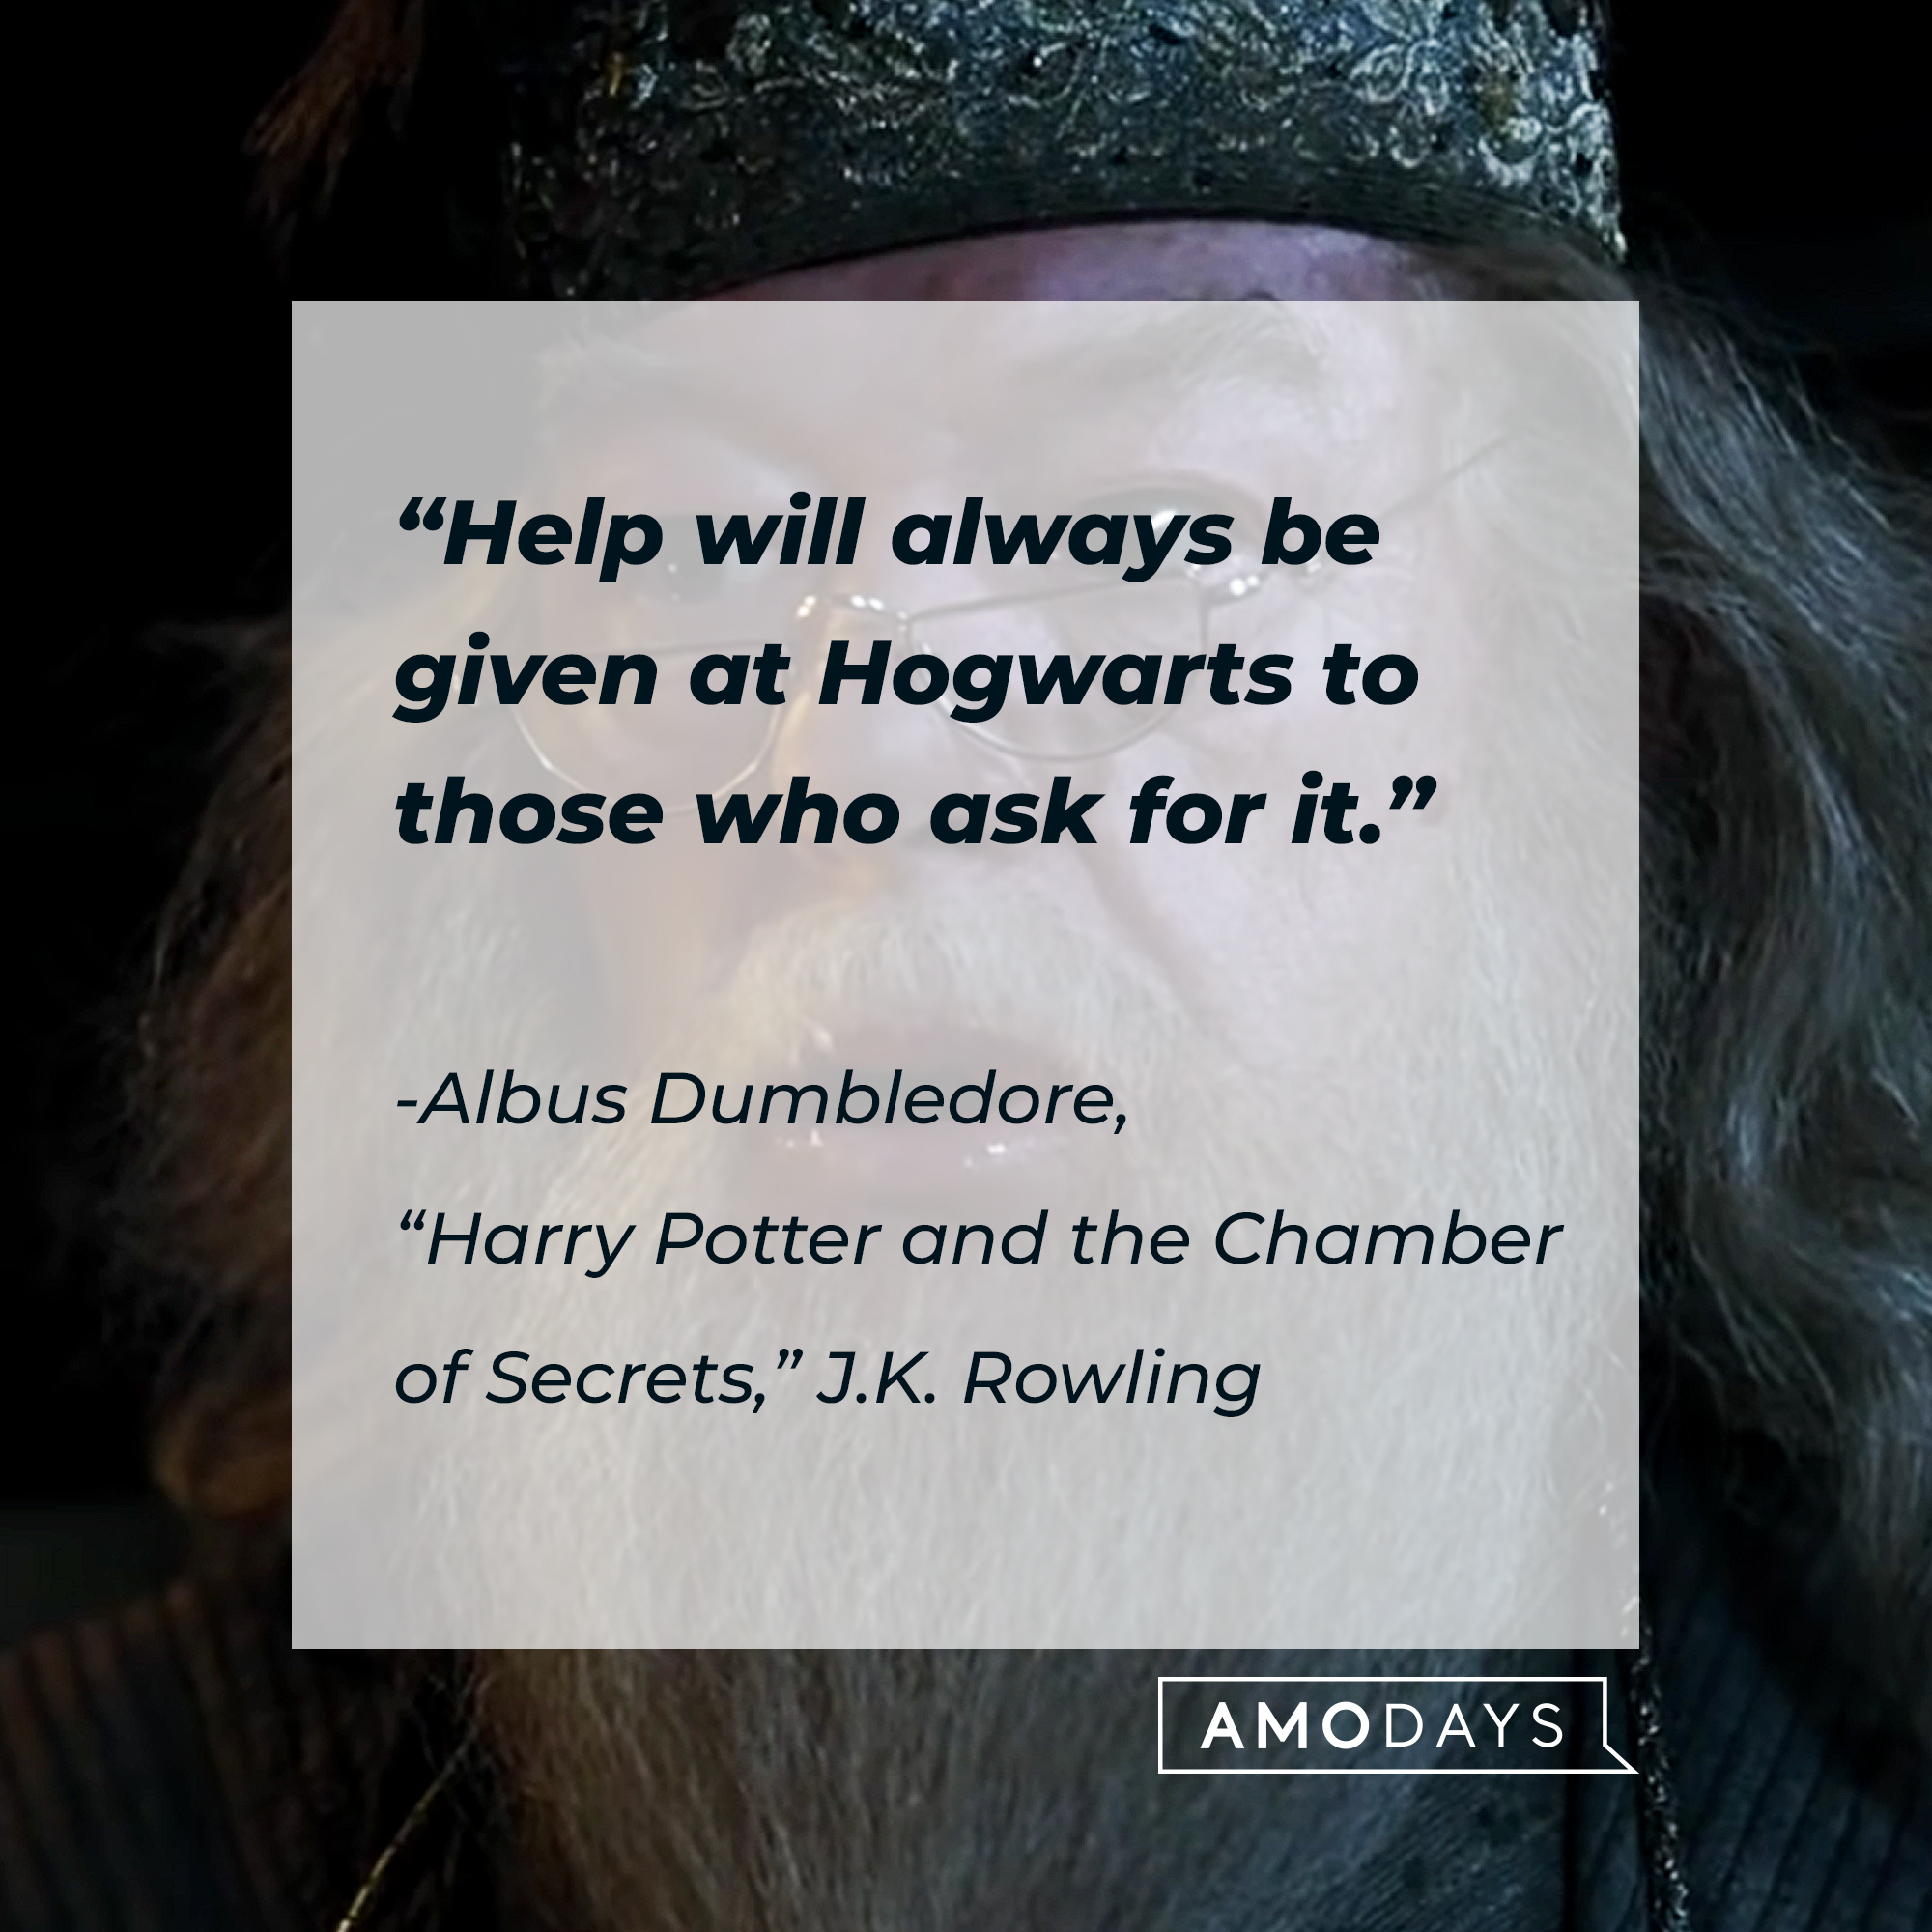 An image of Albus Dumbledore, with his quote: "Help will always be given at Hogwarts to those who ask for it." | Source: Youtube.com/harrypotter